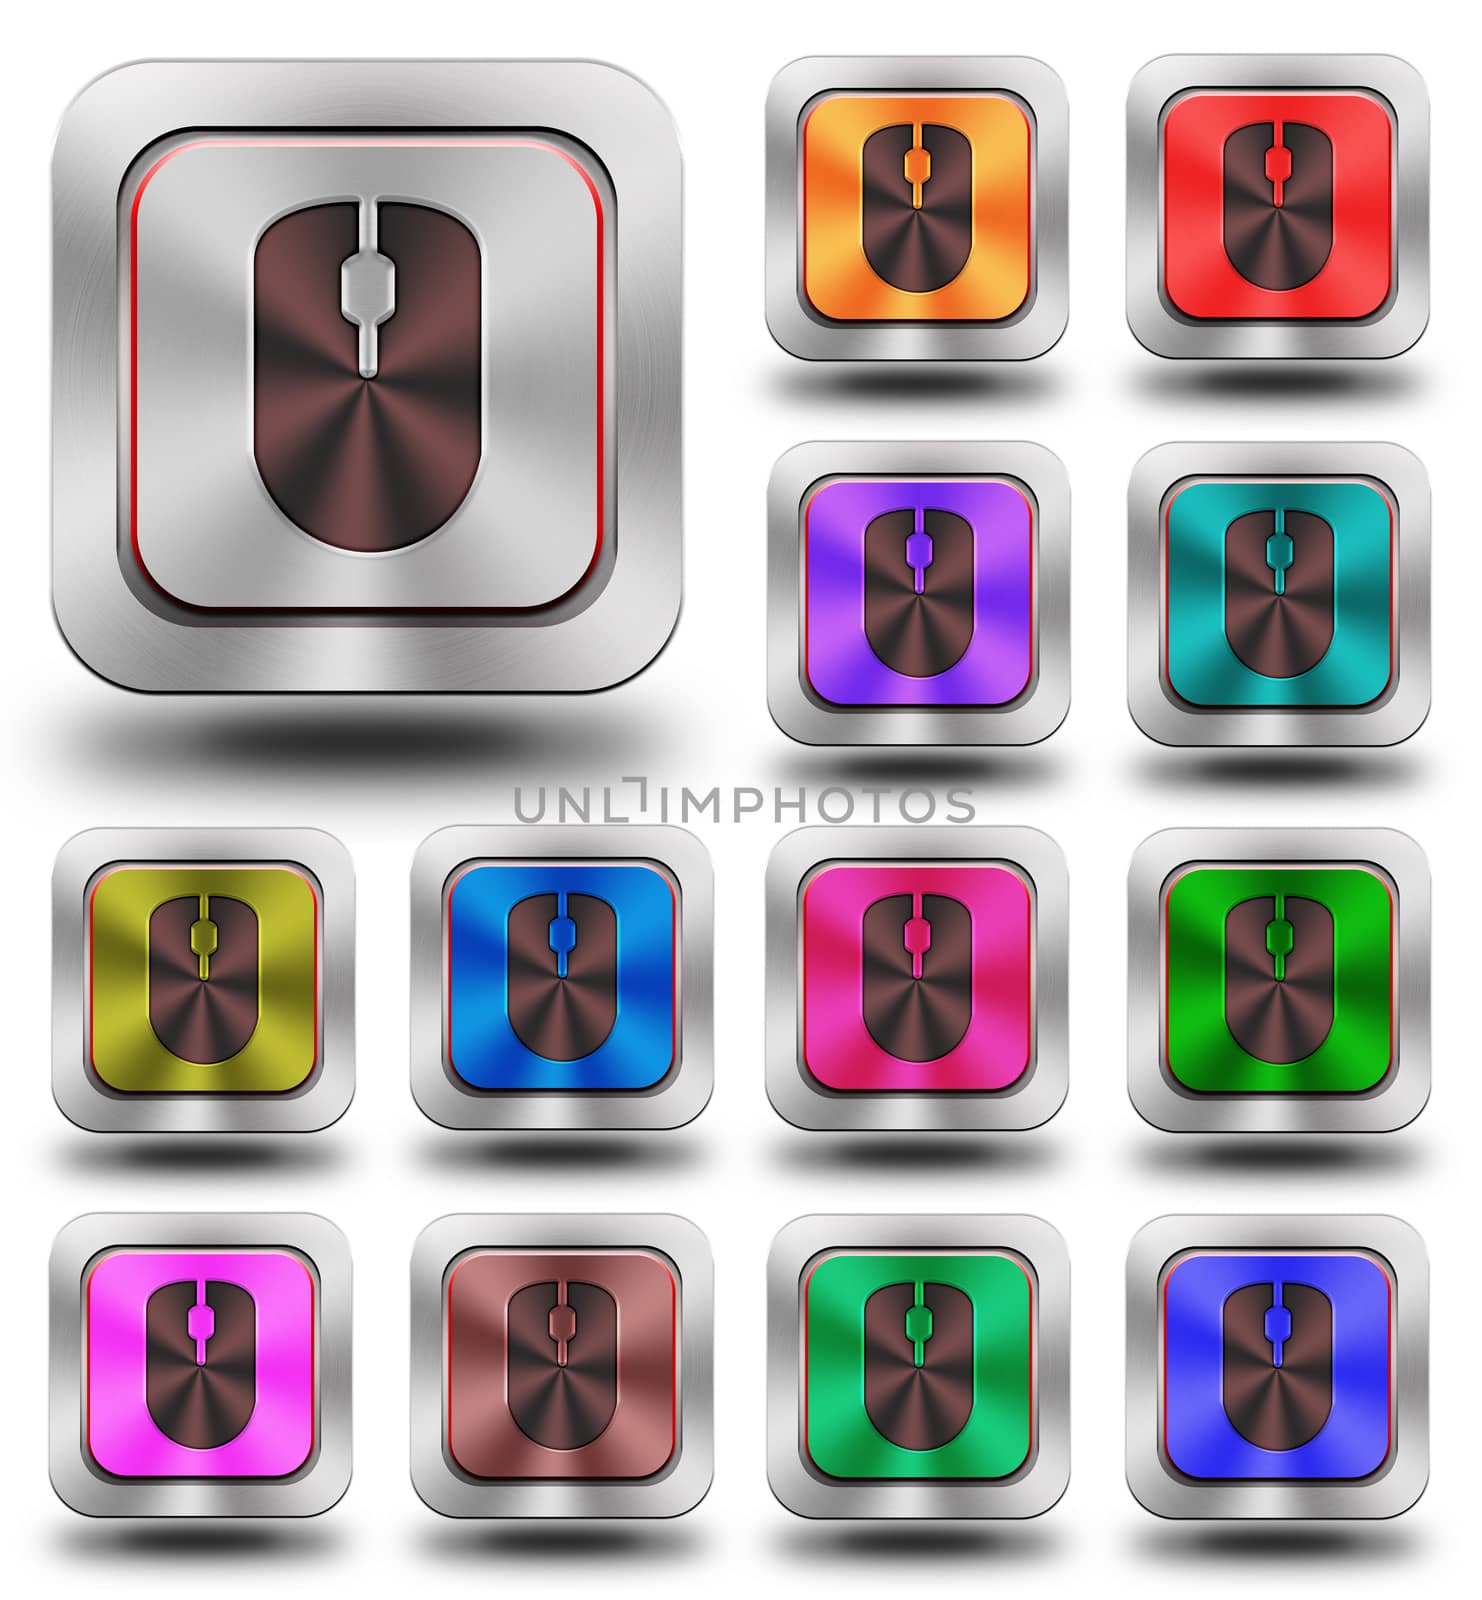 Mouse aluminum glossy icons, crazy colors by konradkerker